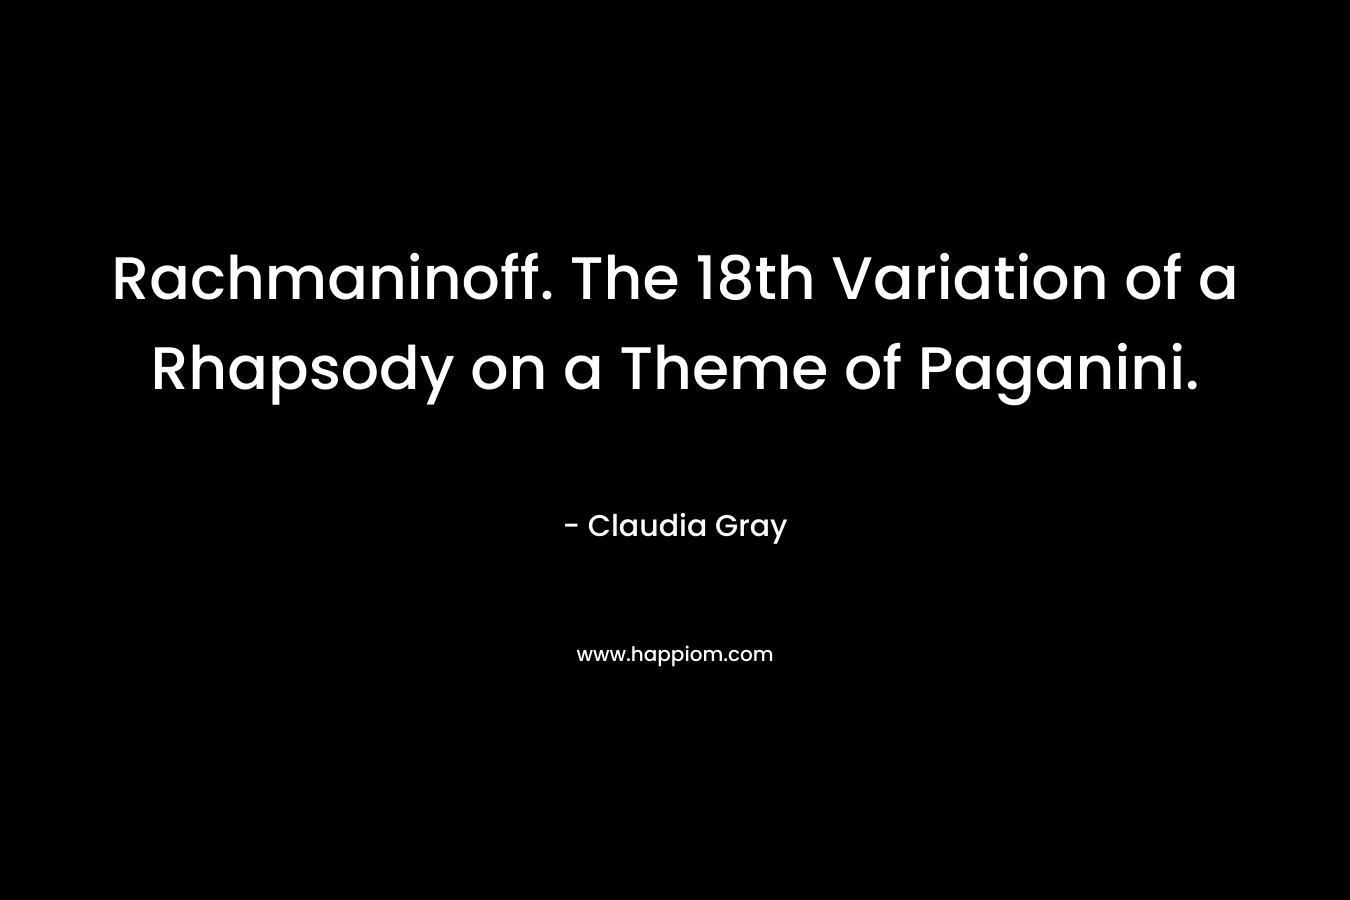 Rachmaninoff. The 18th Variation of a Rhapsody on a Theme of Paganini.